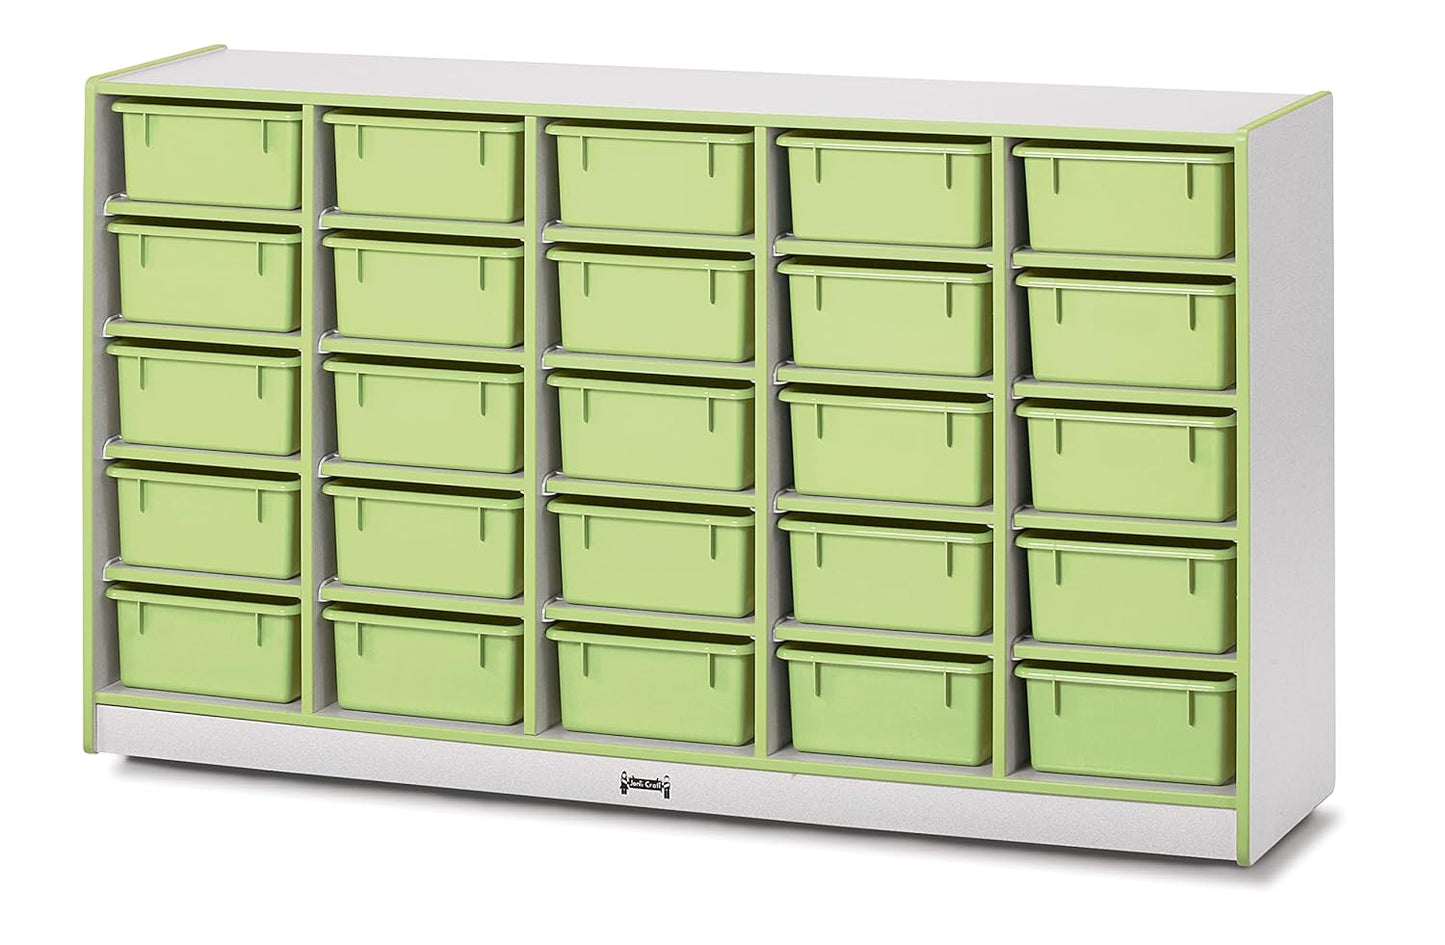 Rainbow Accents 4026JCWW130 25 Tub Mobile Storage - with Tubs - Key Lime Green